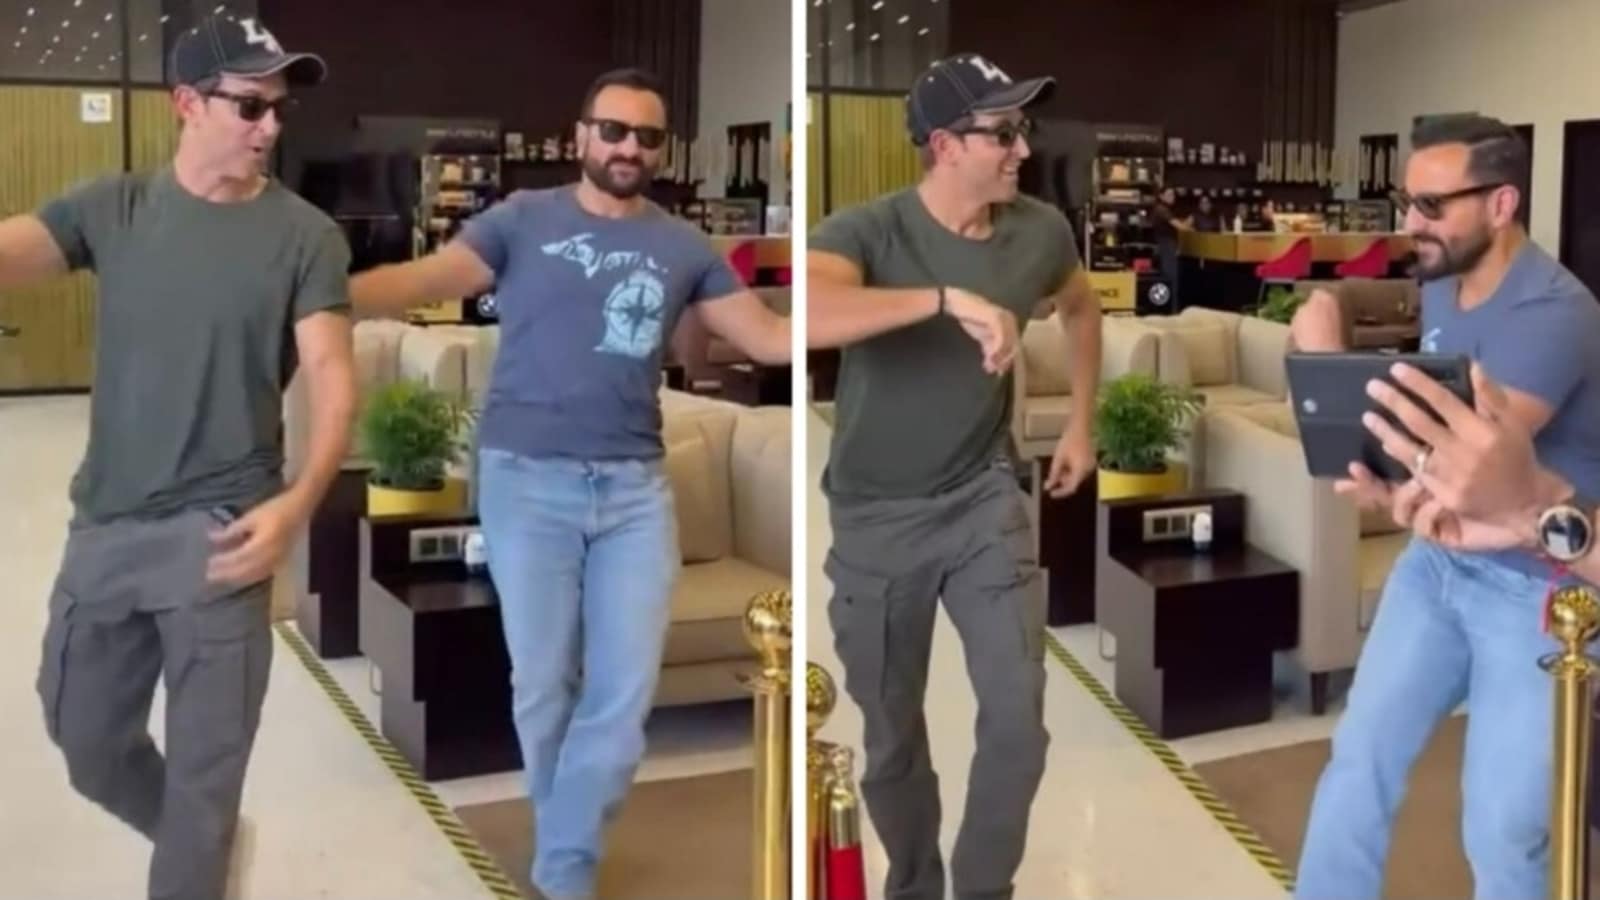 Hrithik Roshan forgets dance steps to Alcoholia, Saif Ali Khan helps him out, watch cute video